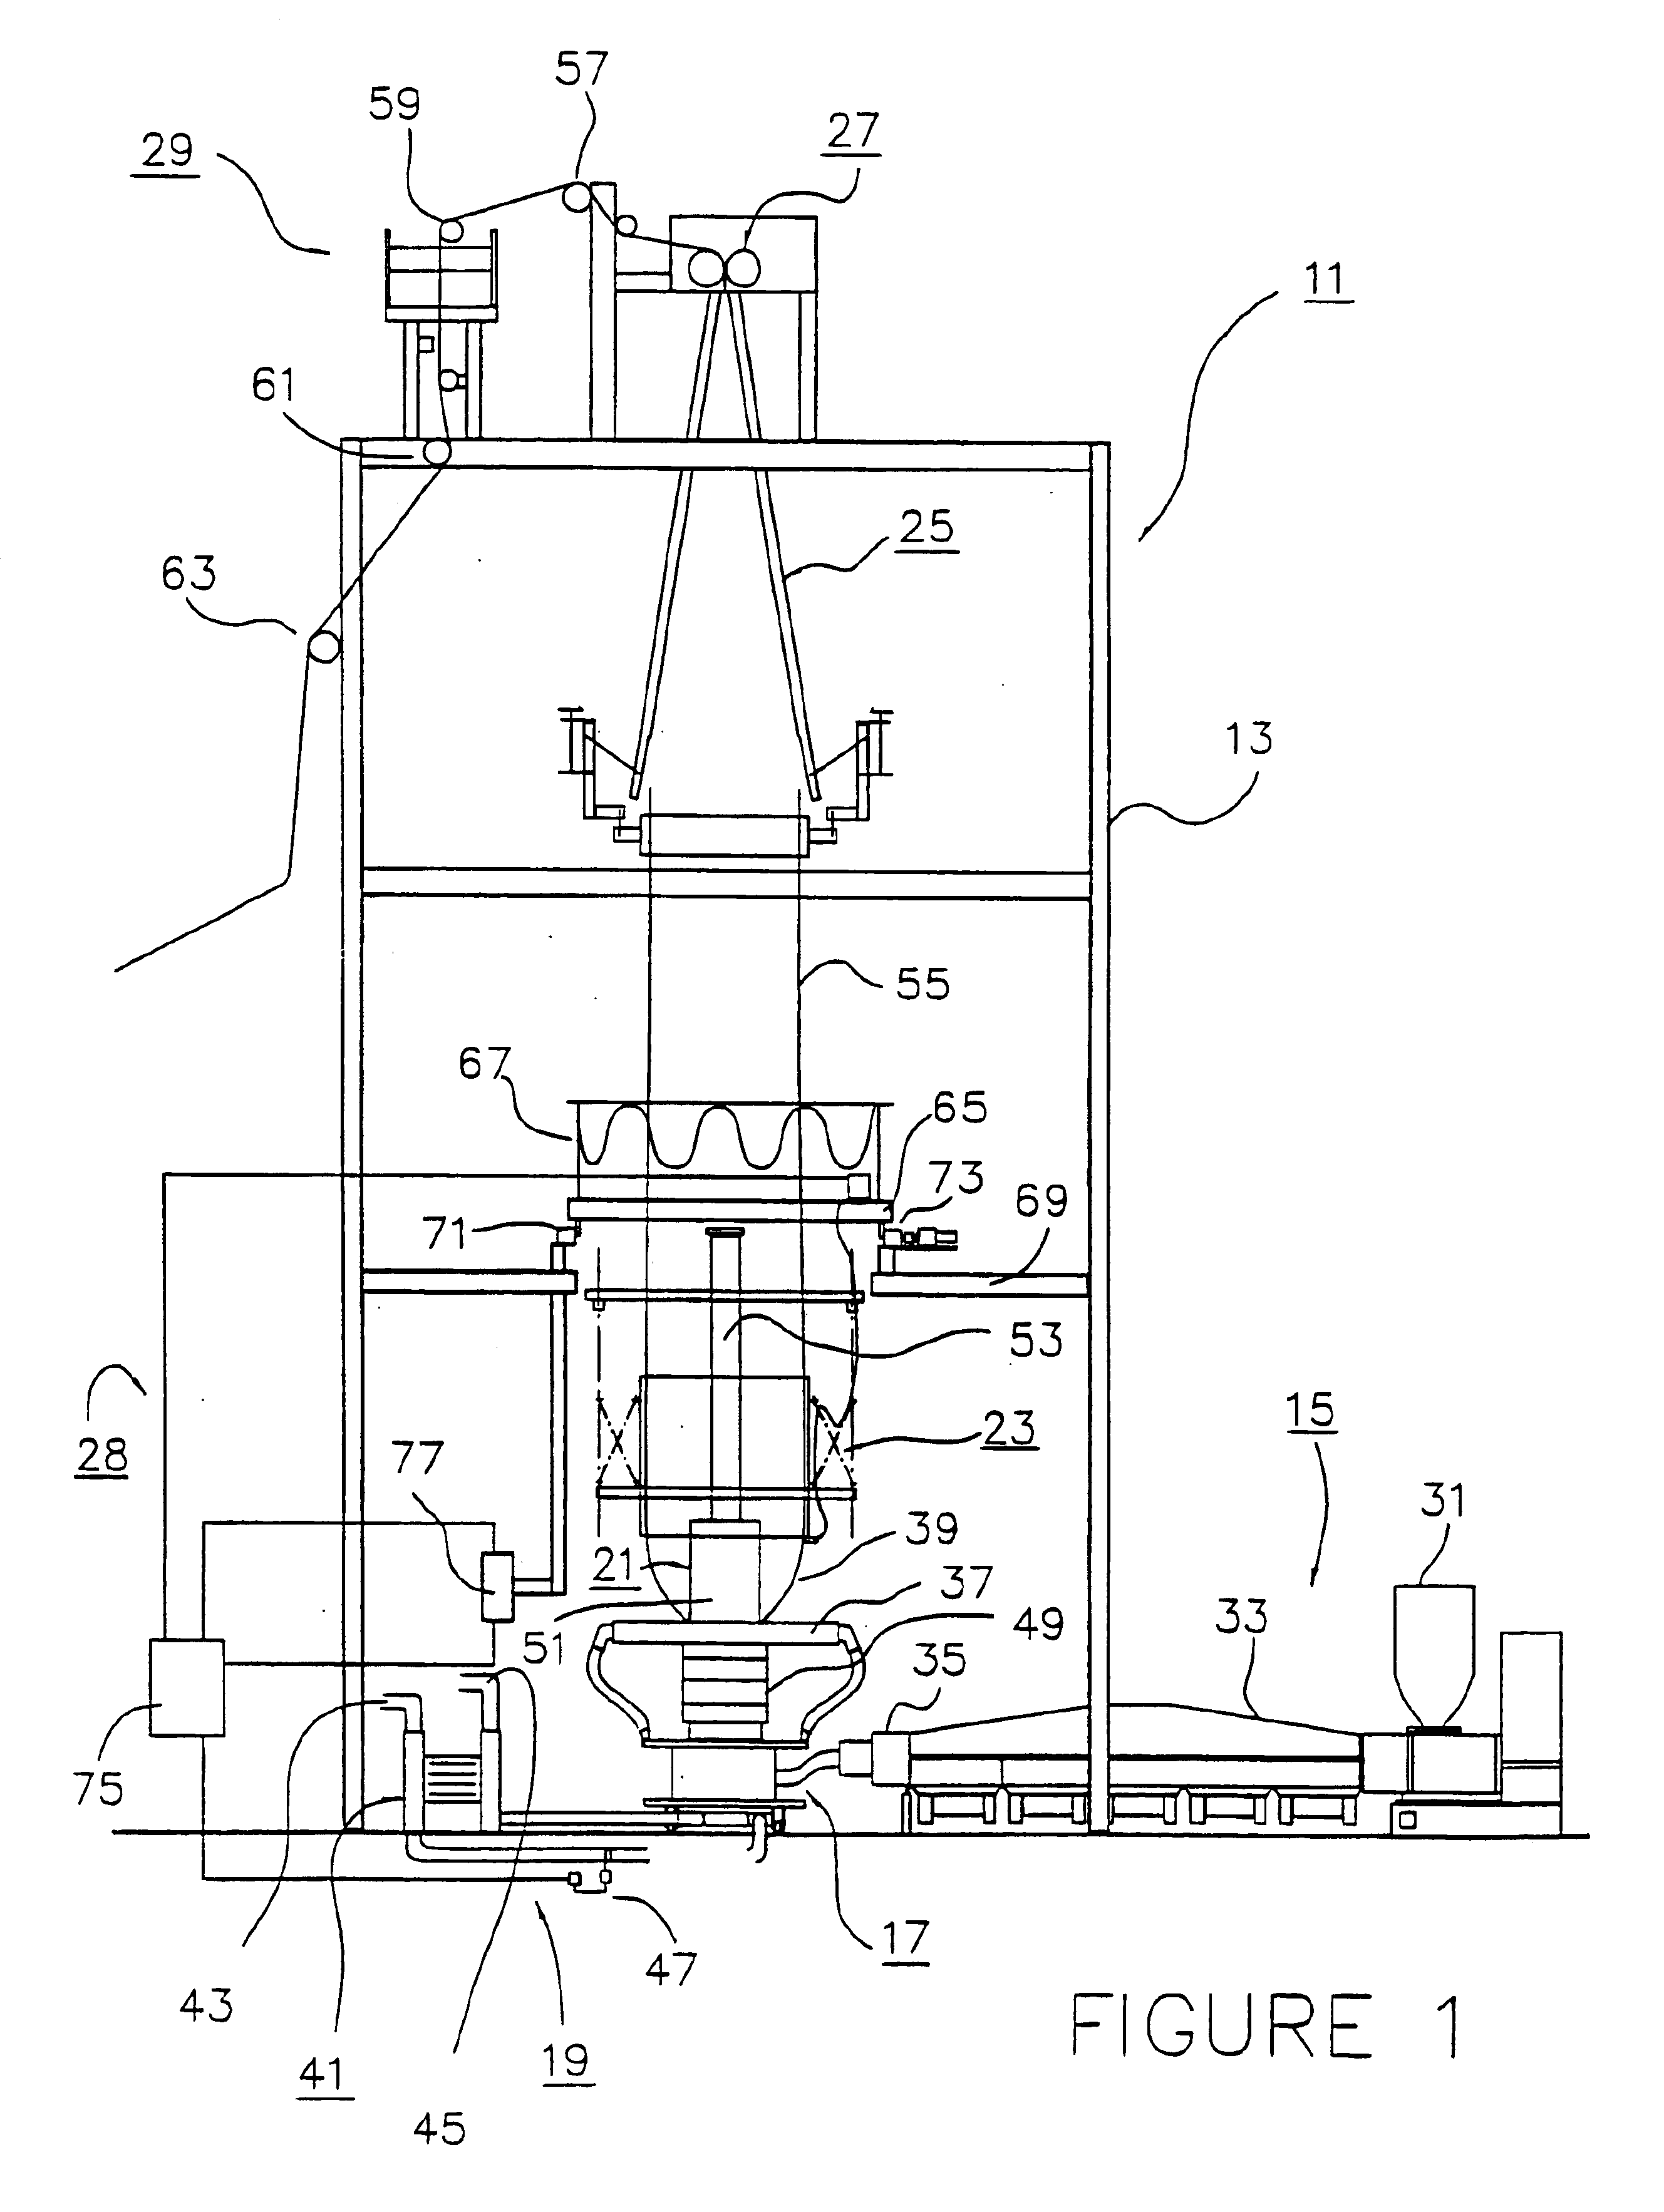 Method and apparatus for lay flat control in an extruded film production line